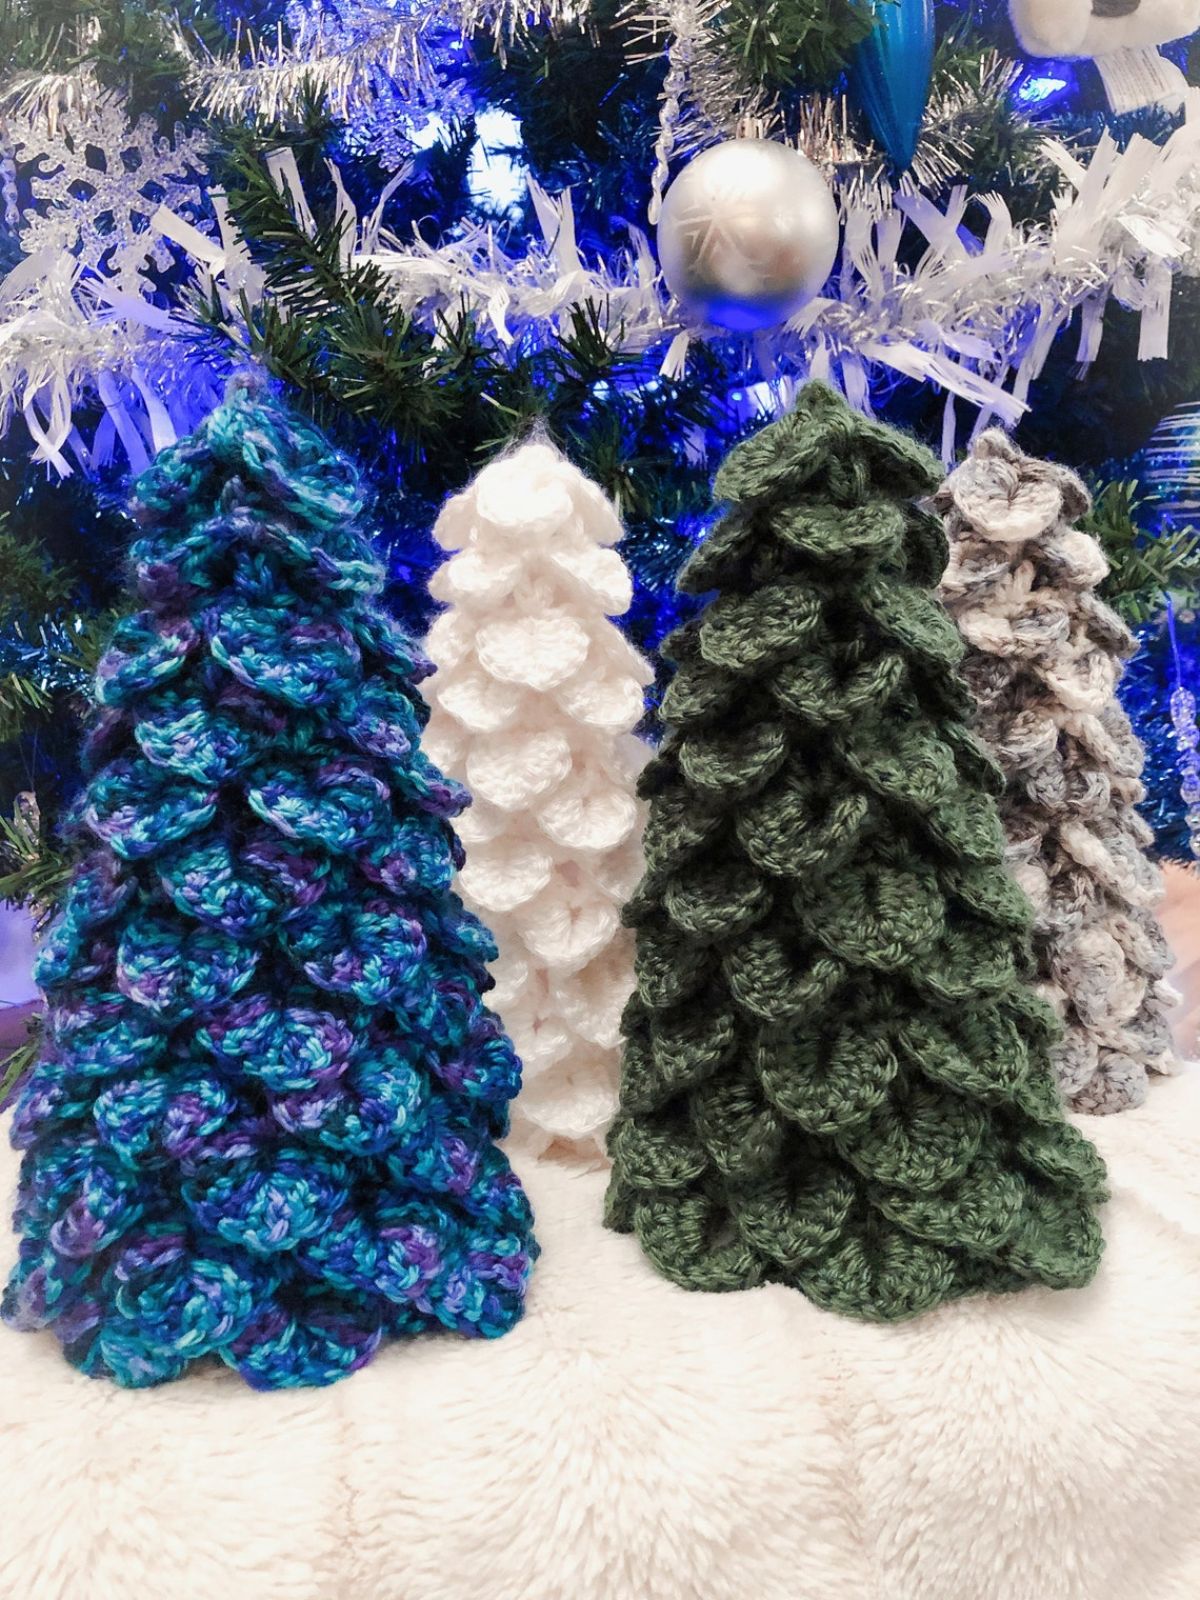 Four evergreen style crochet Christmas trees in green, white, gray, and purple and blue standing on a cream blanket.